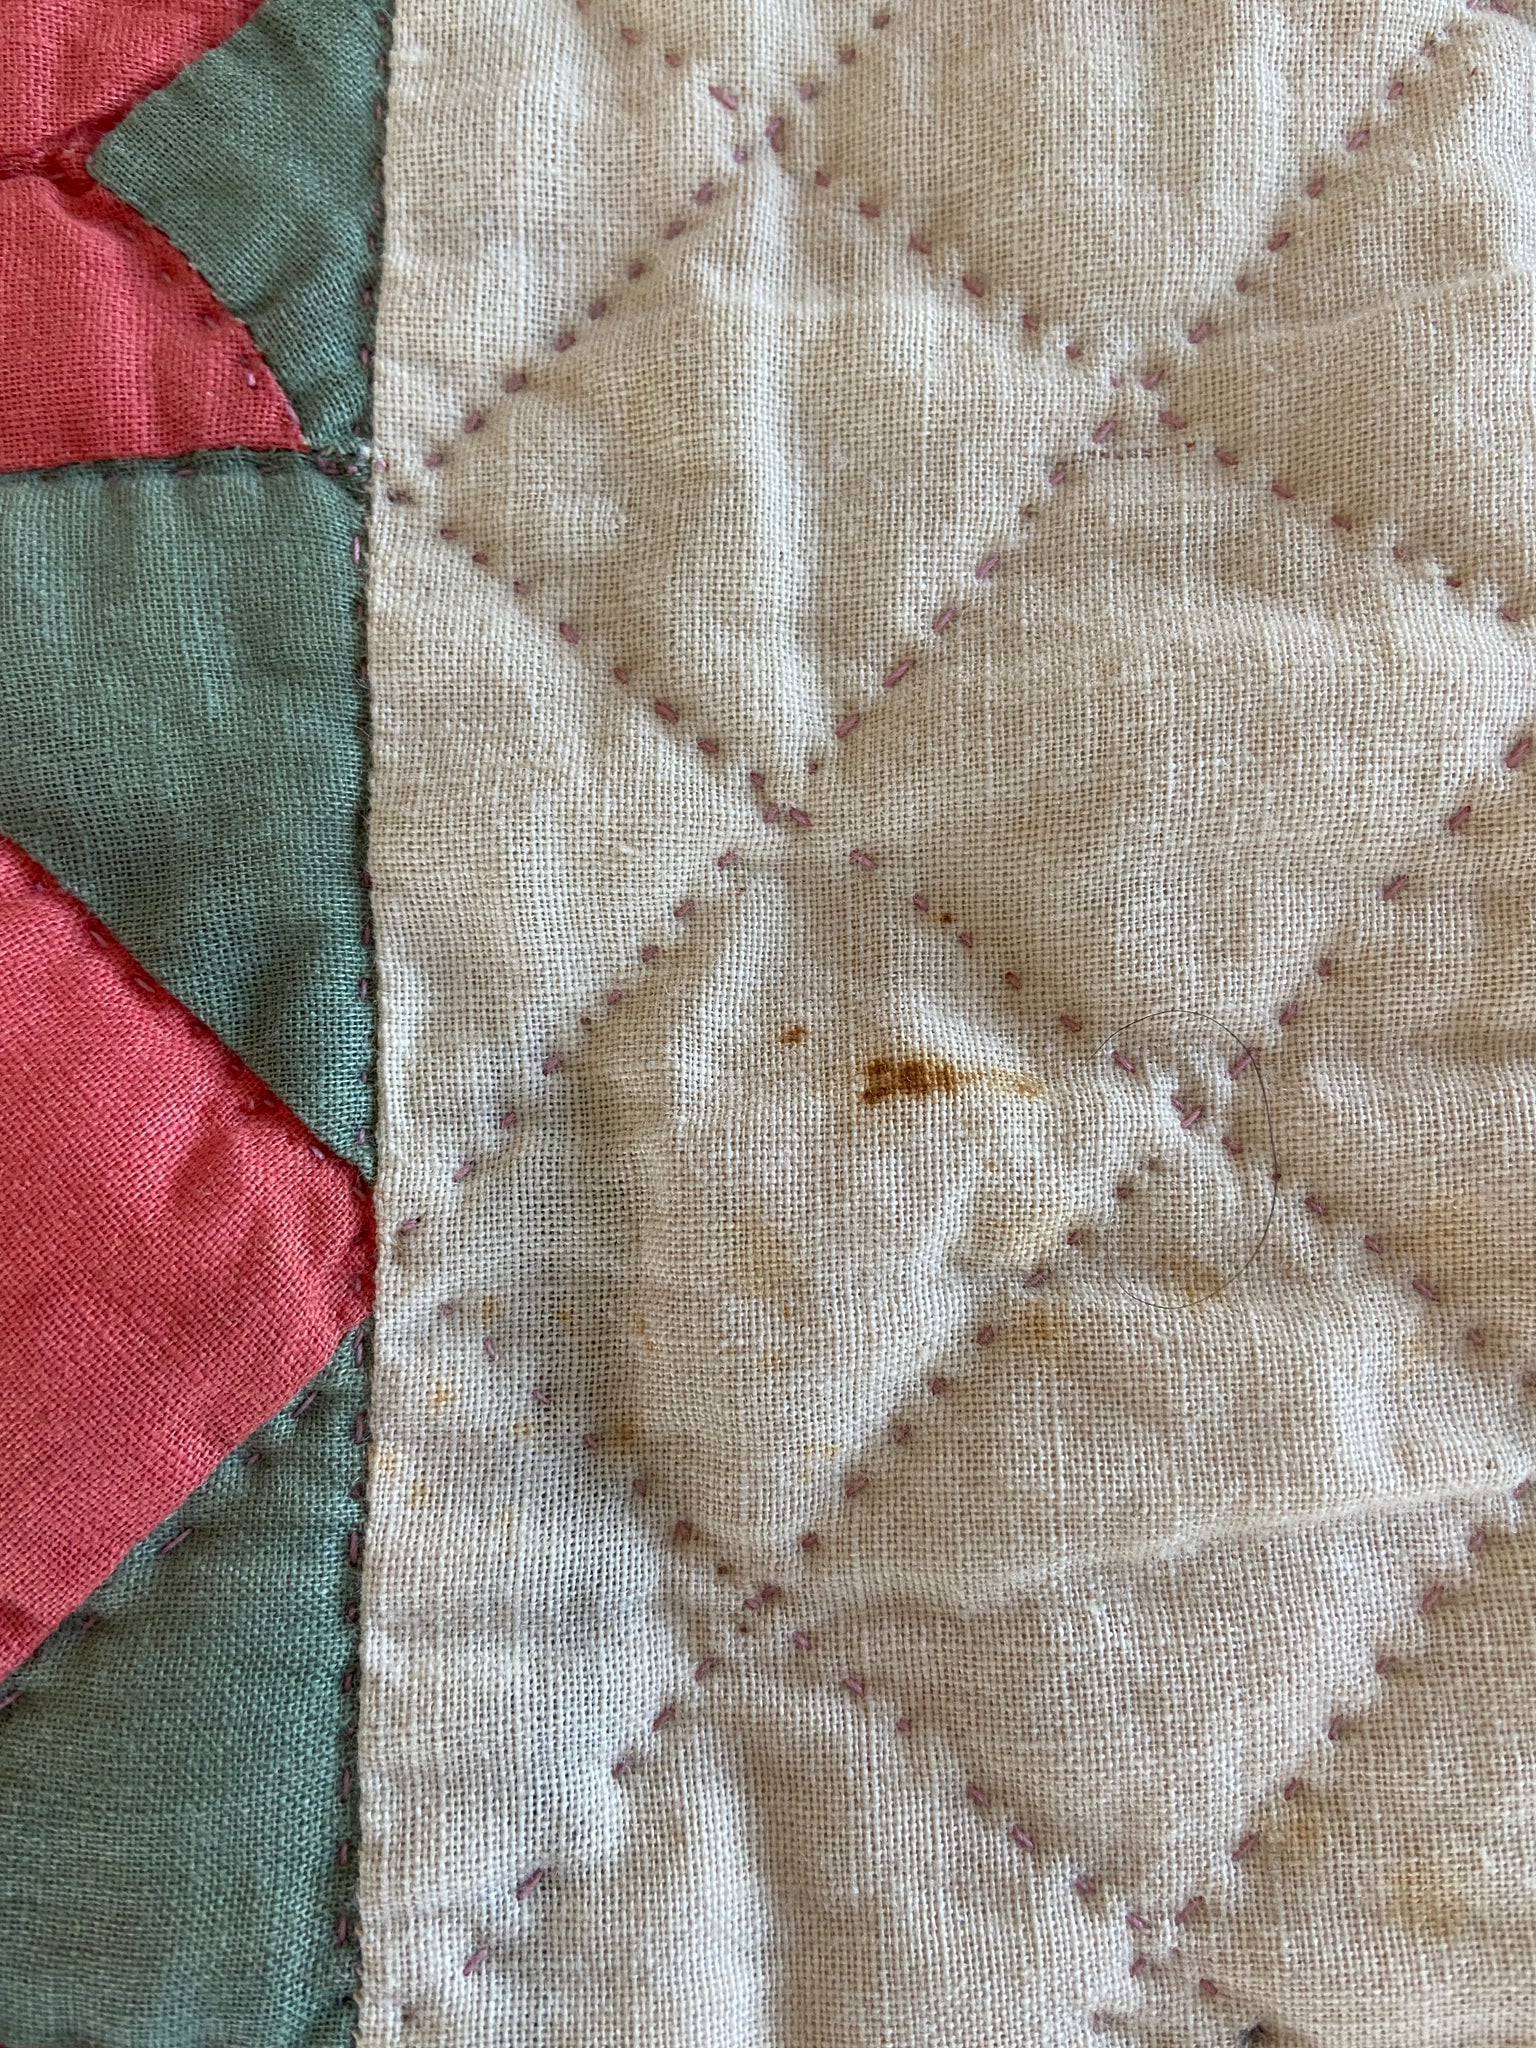 Early 1900s Ribbon Star Hand Sitched Quilt